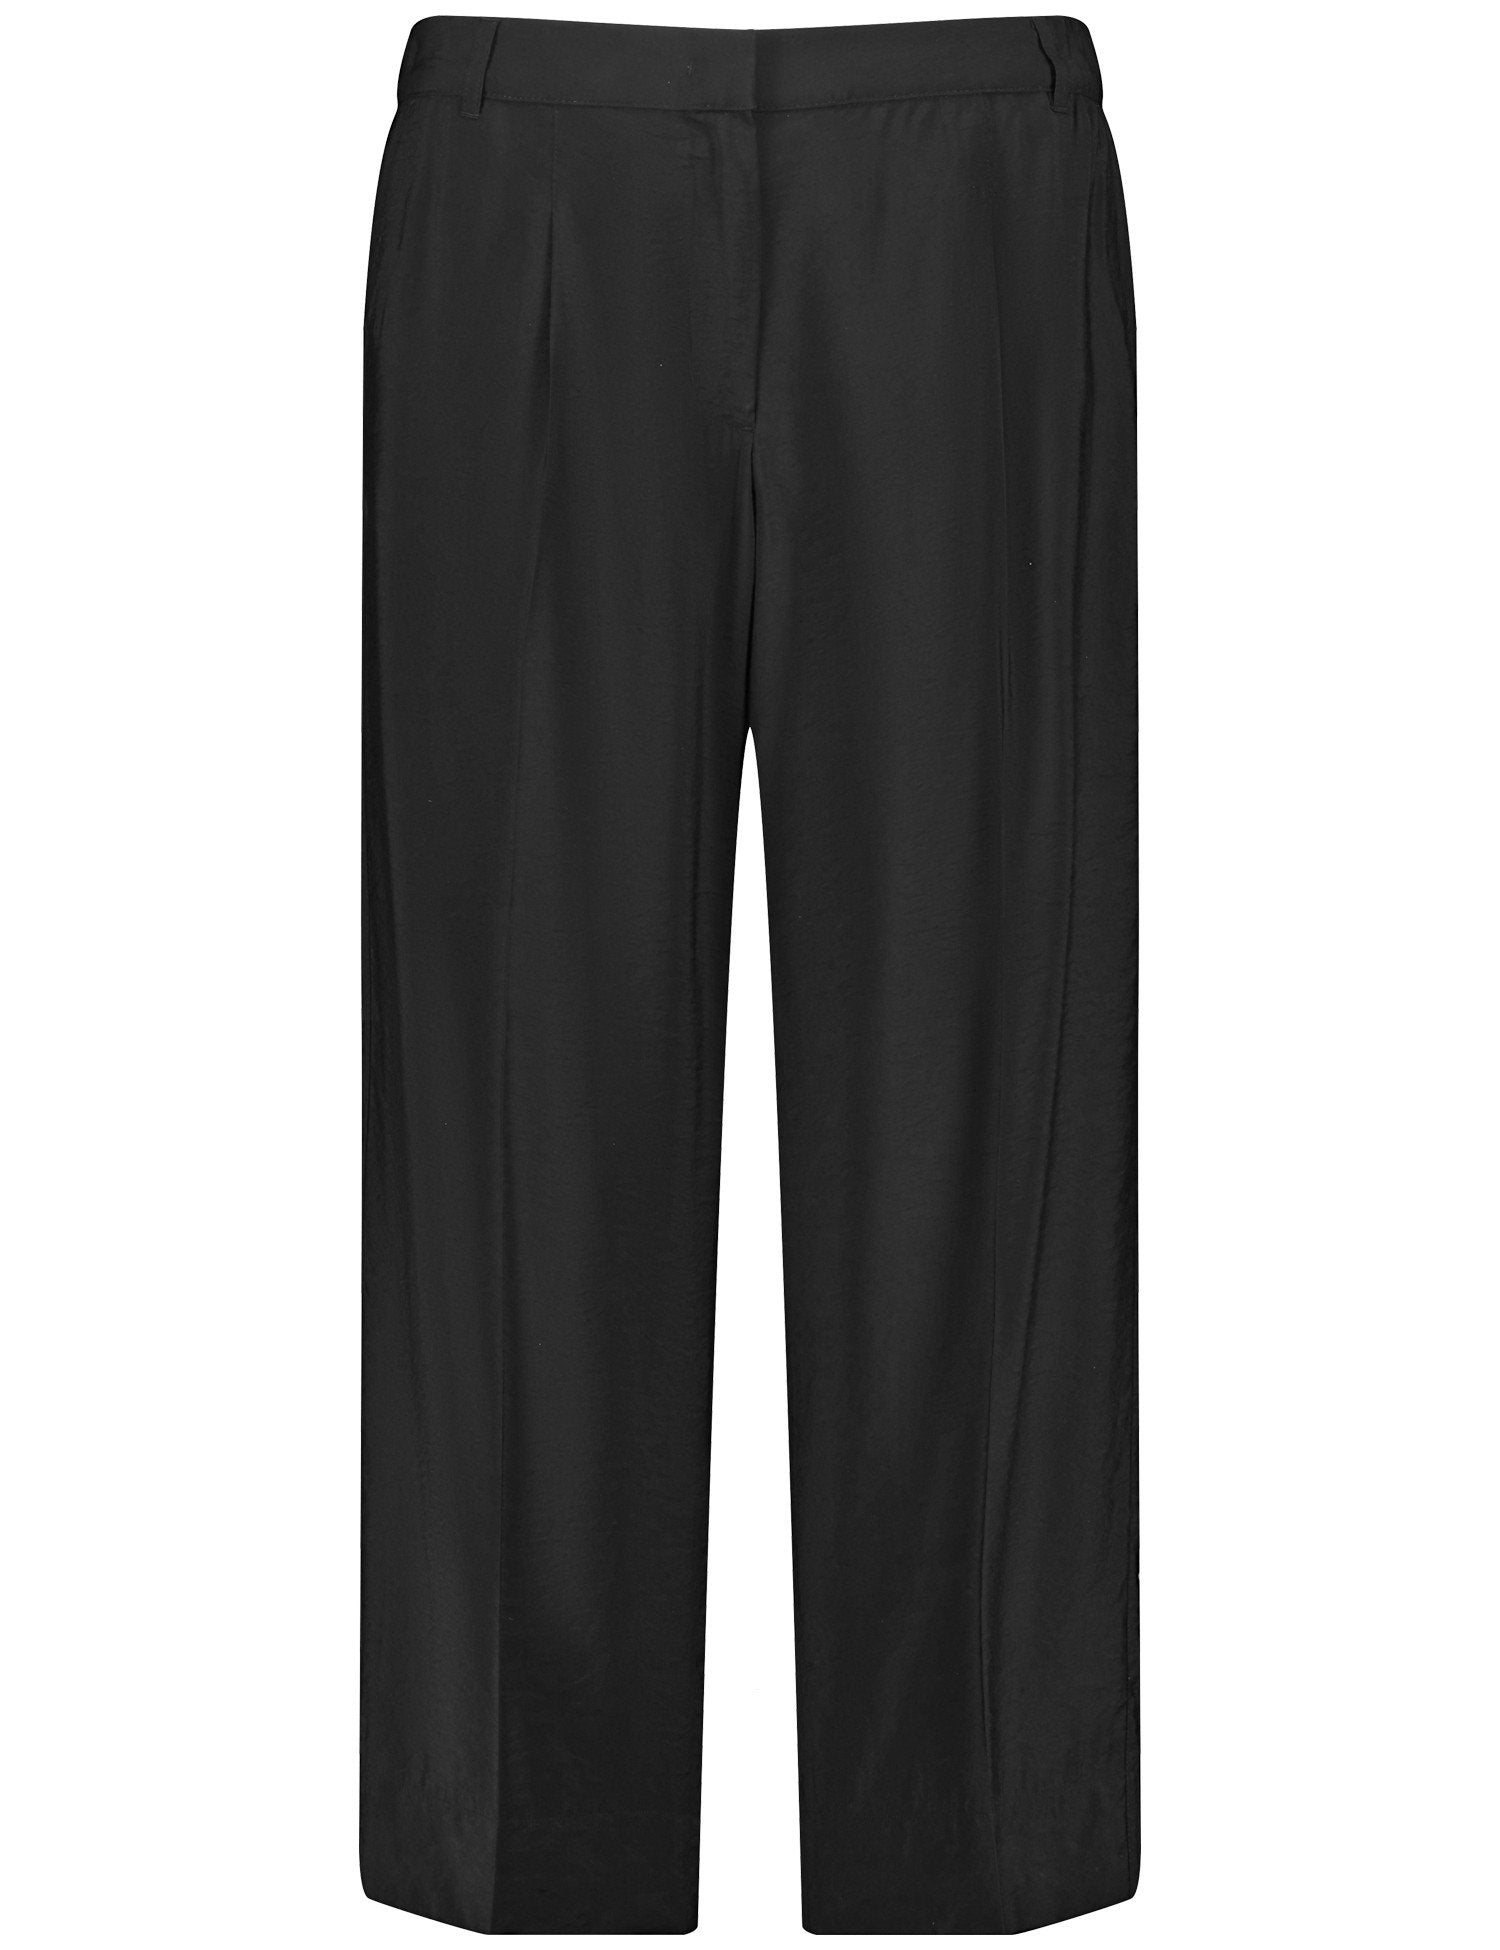 Lightweight 7/8-Length Trousers With A Wide Leg_420026-21052_1100_07